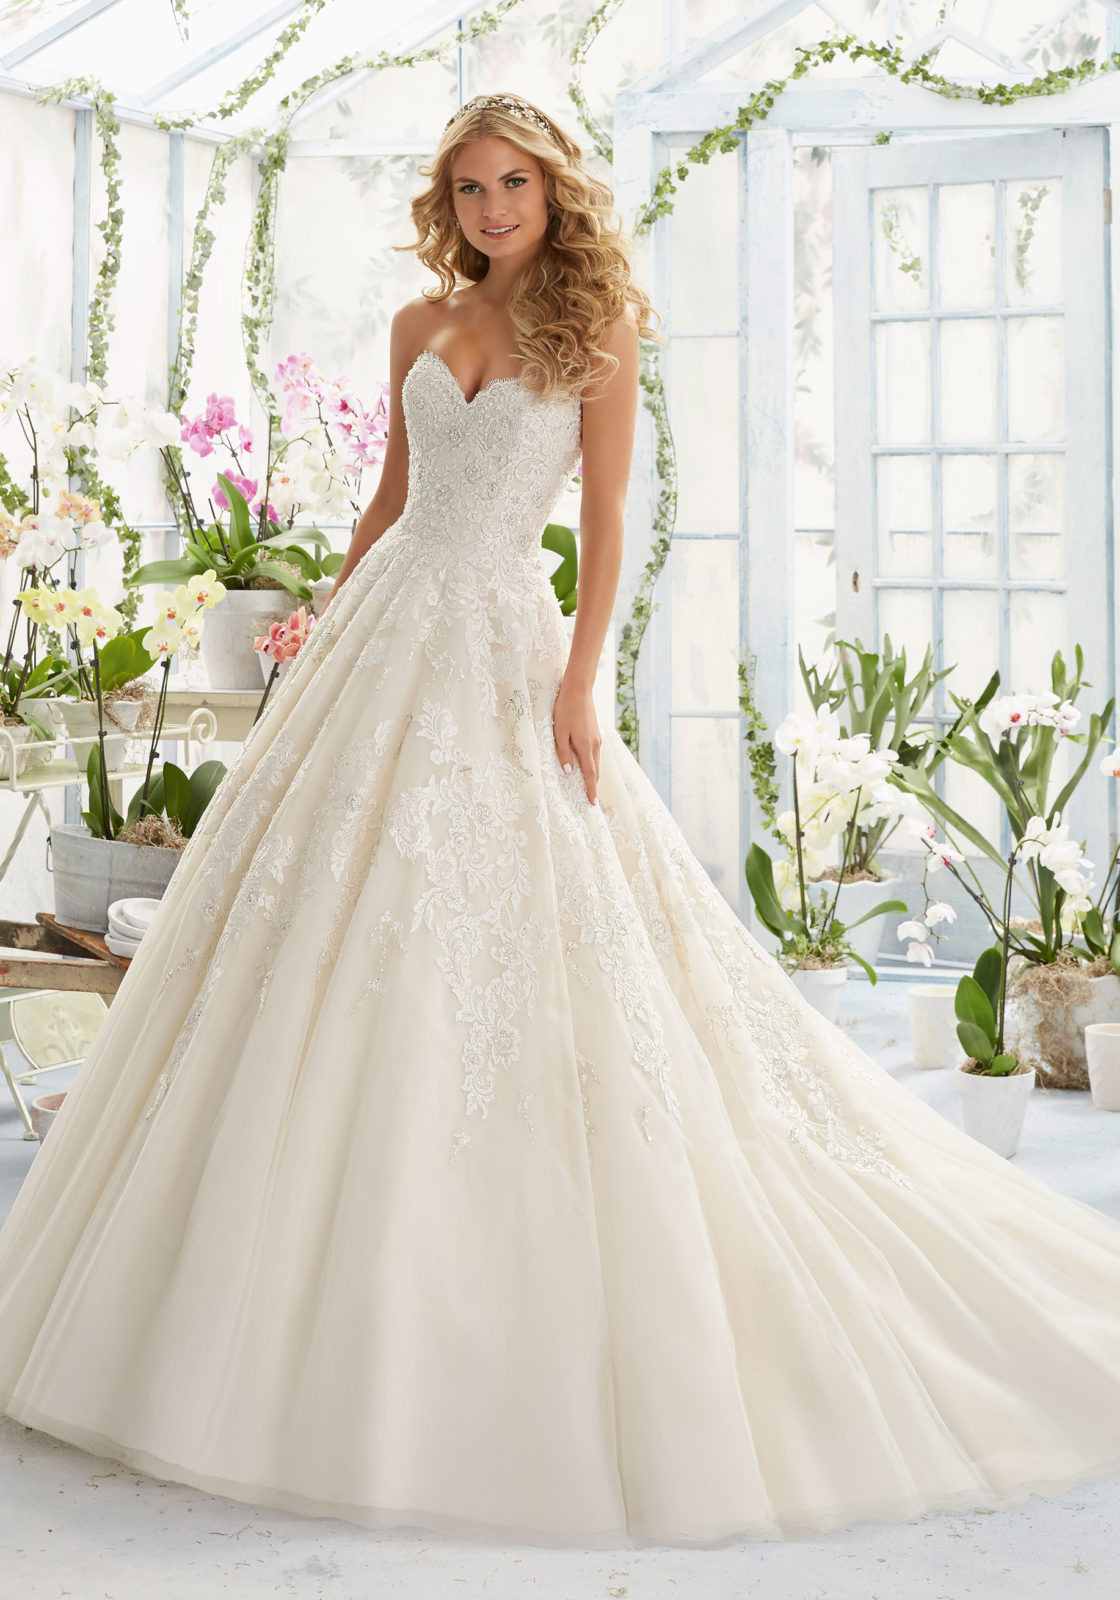 Embroidered Wedding Dress
 Elegant Embroidery on Classic Tulle Wedding Dress